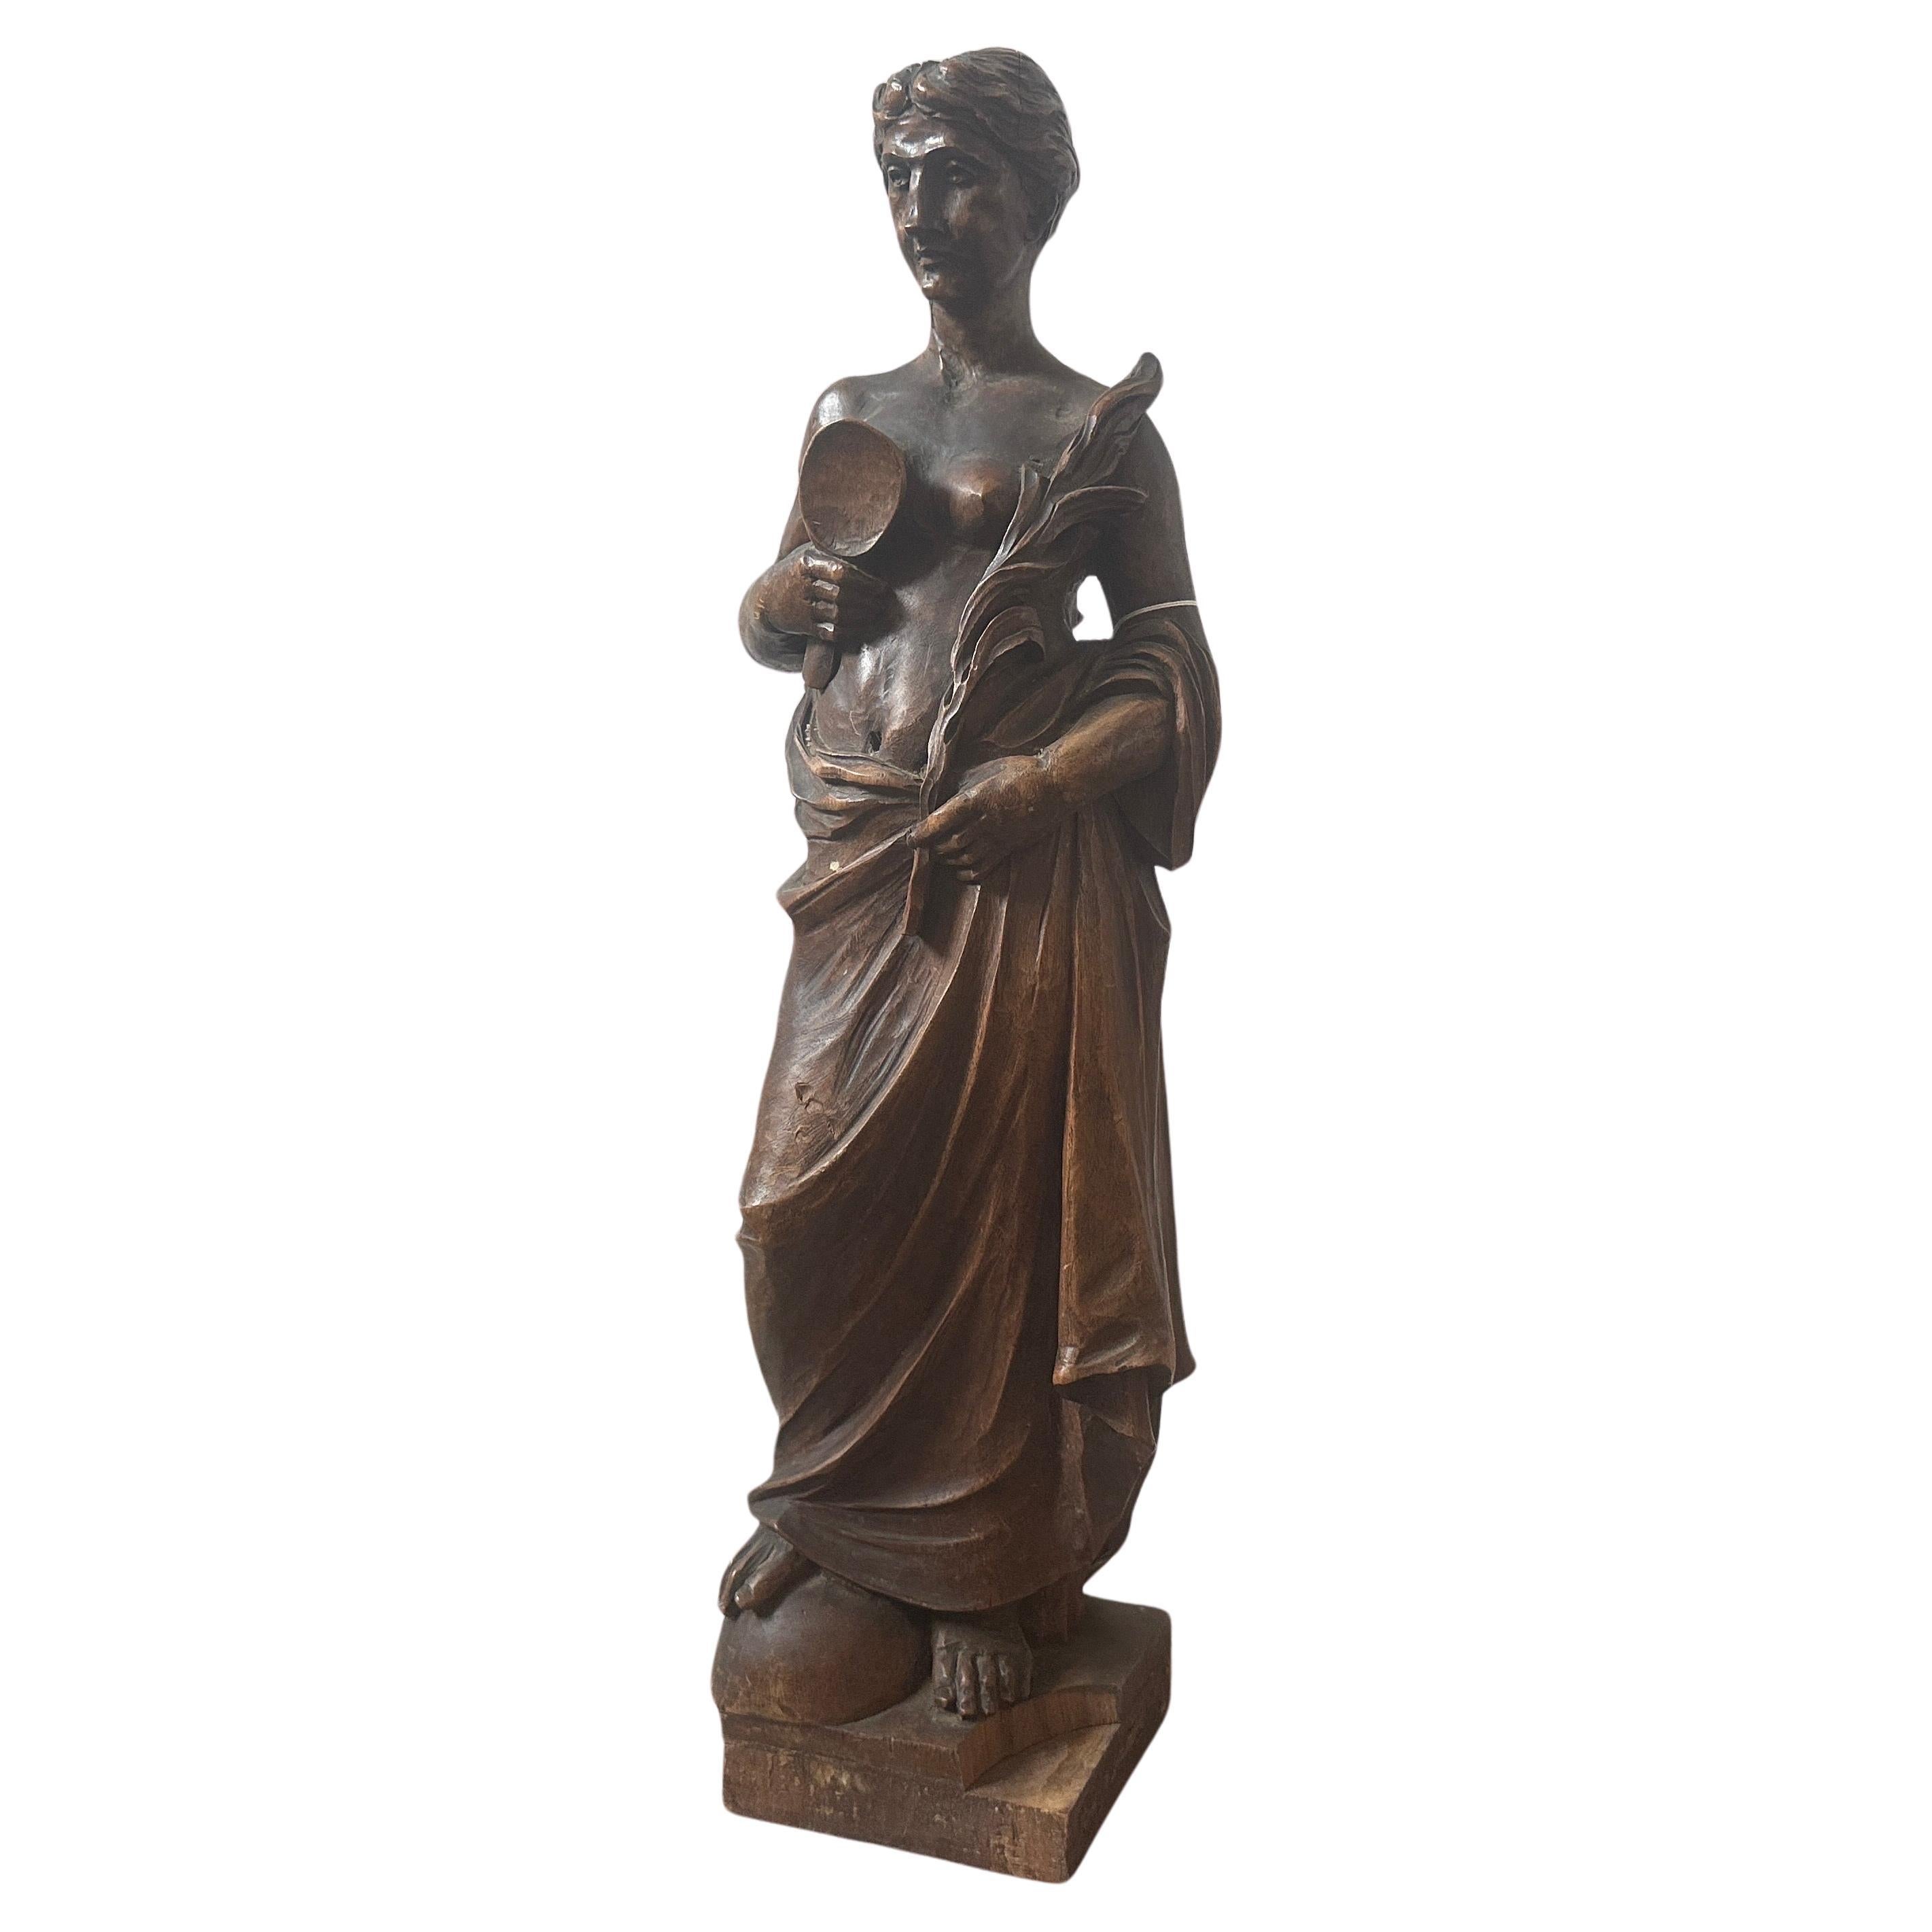 This Walnut Italian Sculpture of a Roman Bather is a sublime example of the artistic ideals of its time. It embodies the classical principles of beauty and balance while showcasing the exceptional skill of the sculptor in bringing a moment of